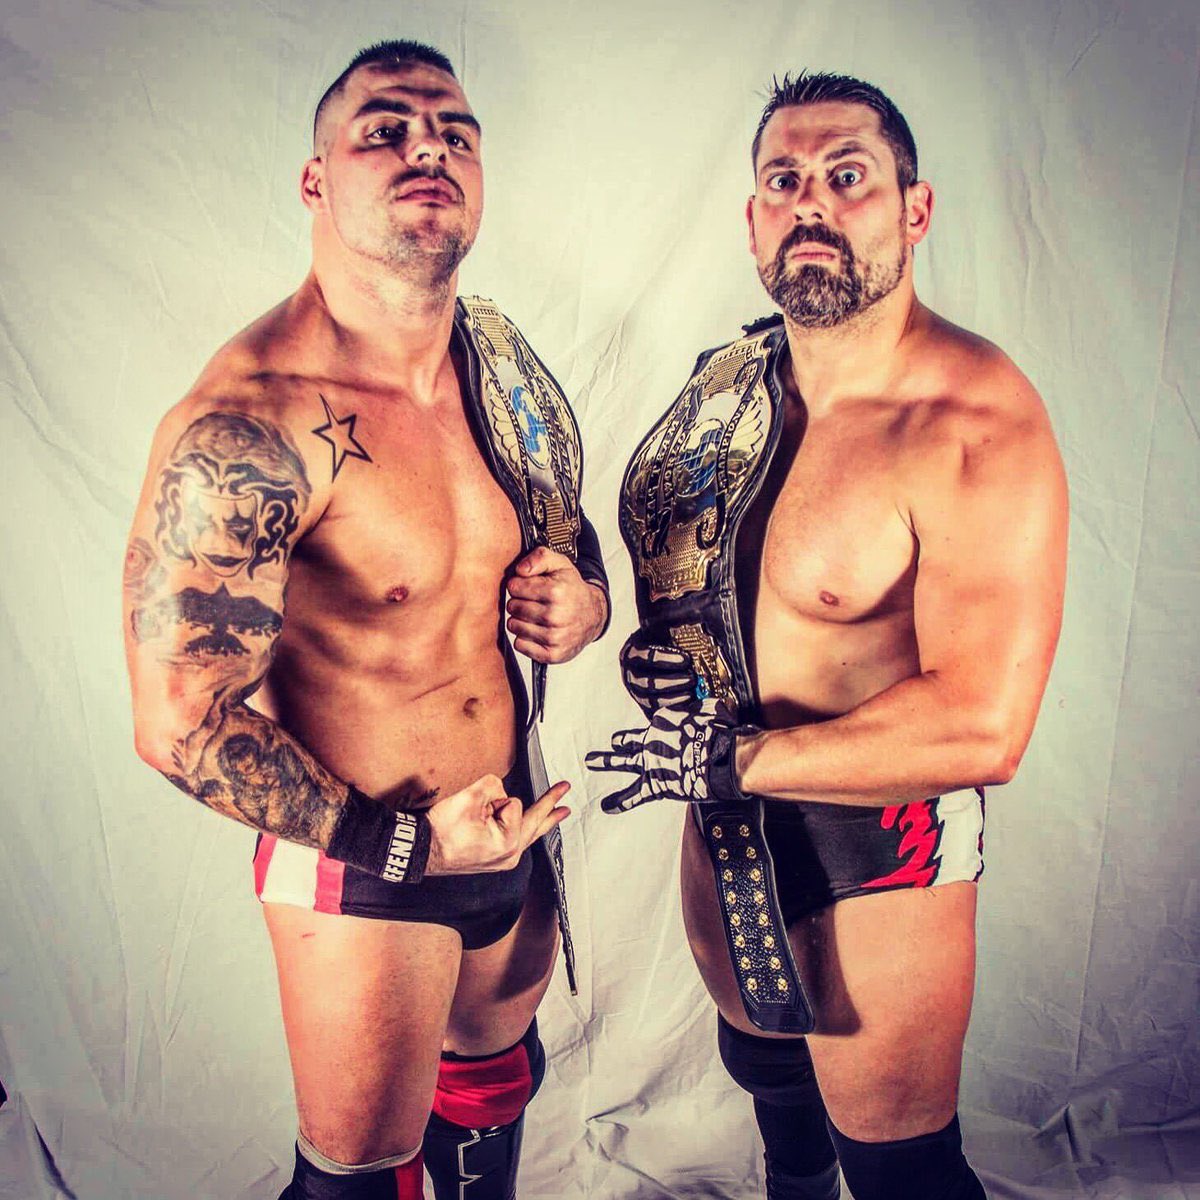 Todays wrestling flash back  @CorvinNI  @BonesawAl been ott tag team champions the good old days I would love to see them have another tag title run I also miss  @dunkdisorderly been with them that was a bad ass group